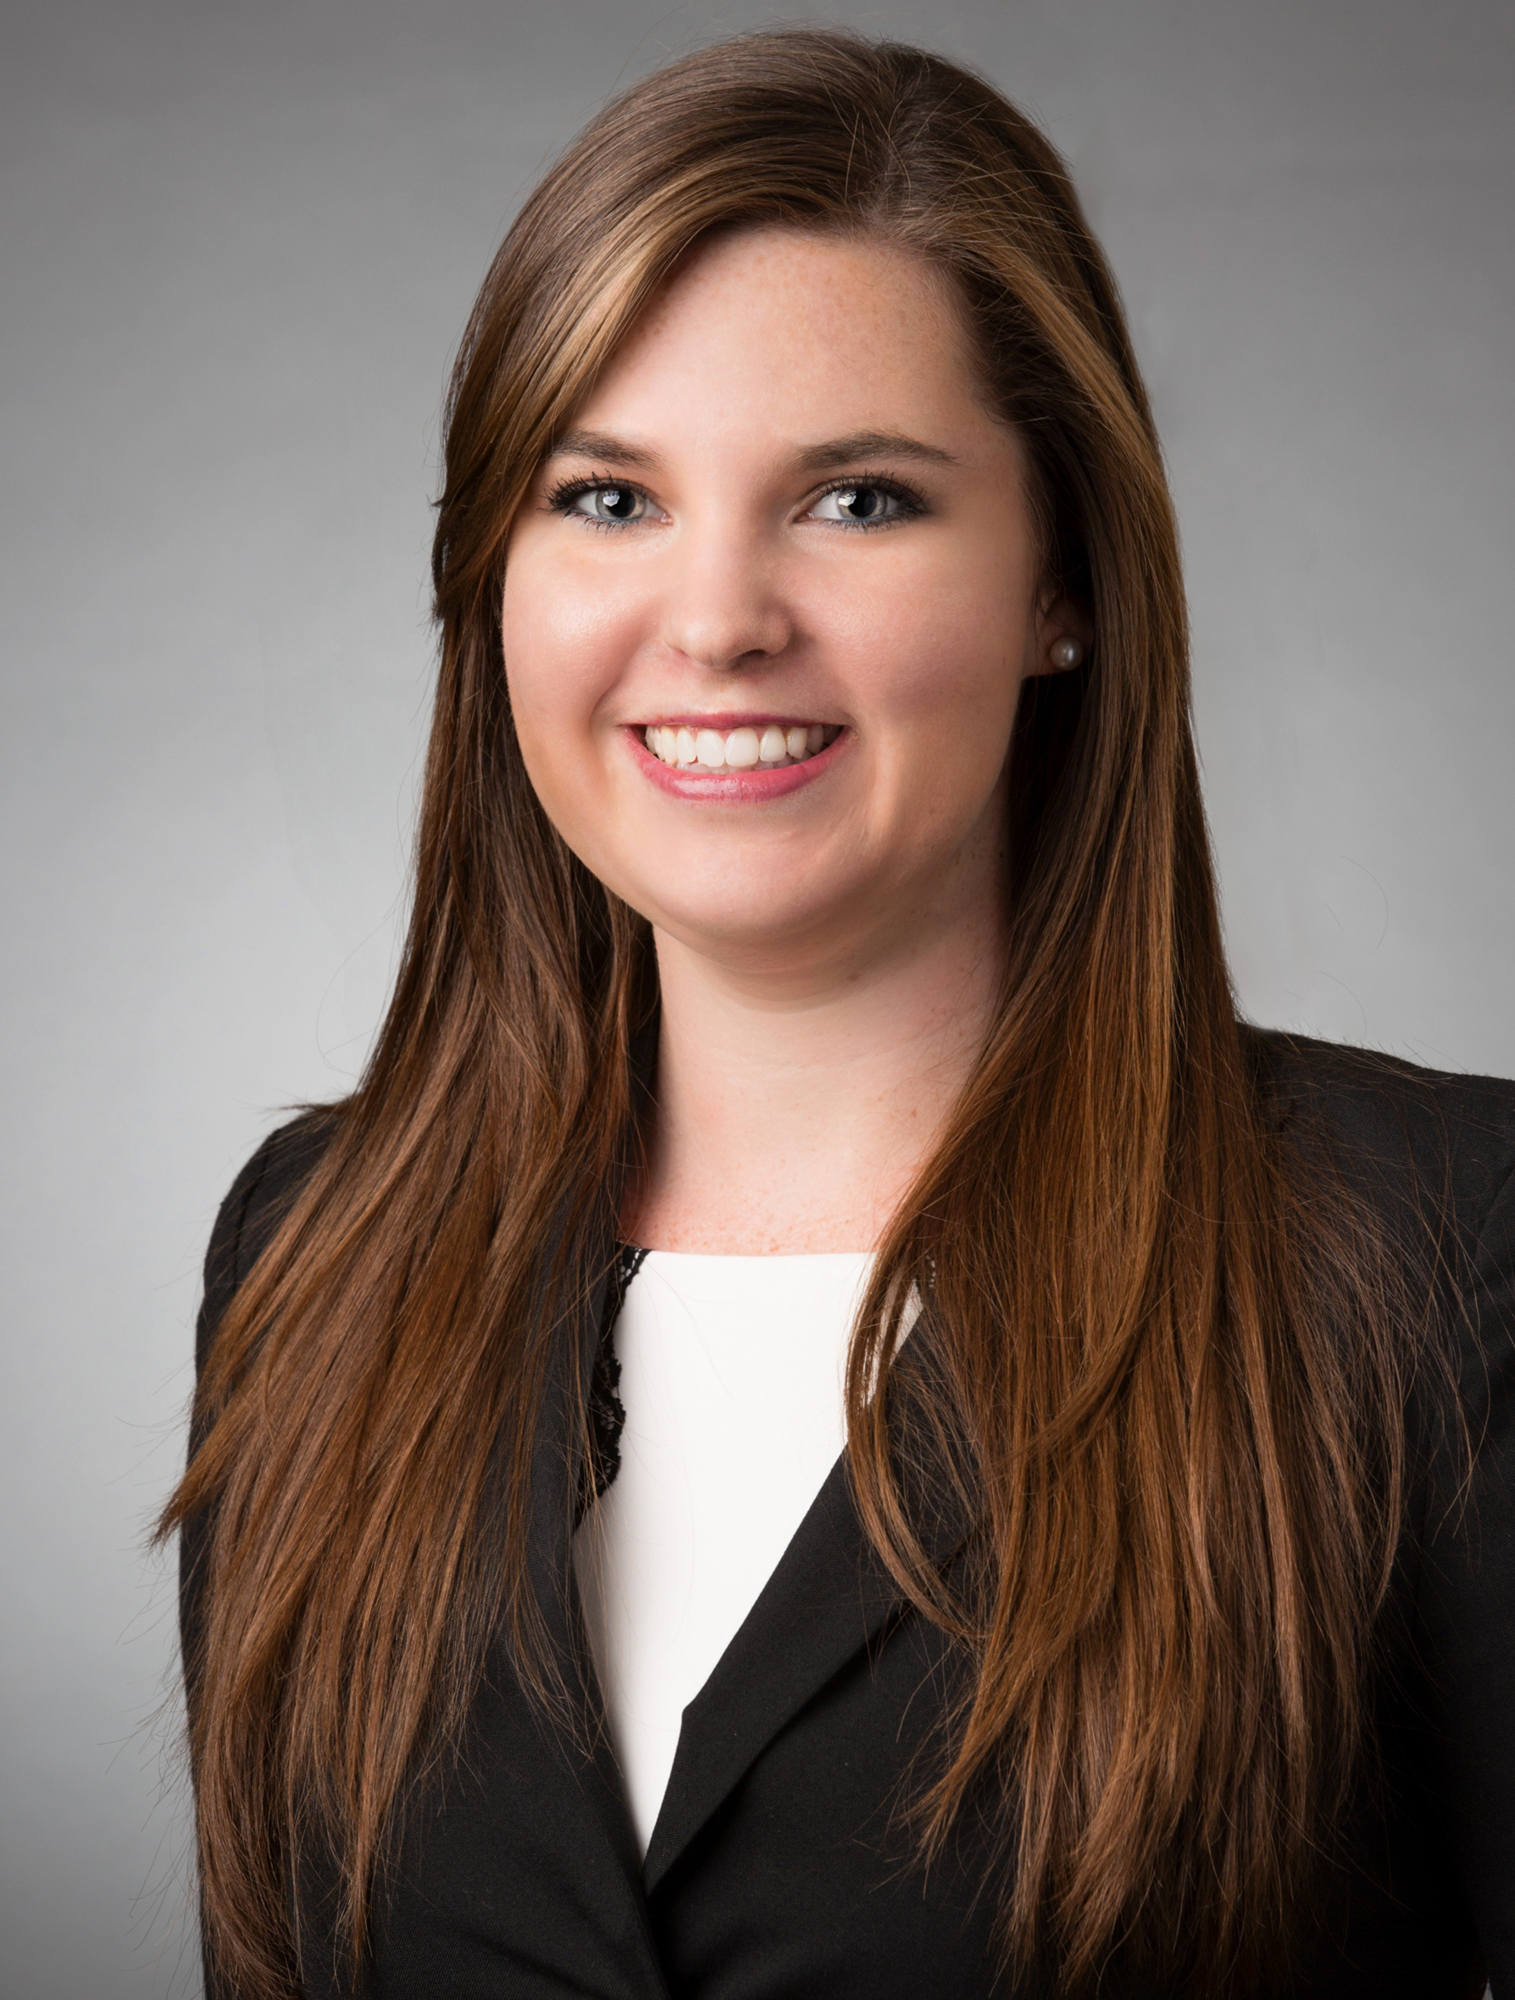 Courtesy. Keely Morton is a member of the firm's Product Liability Practice Group.